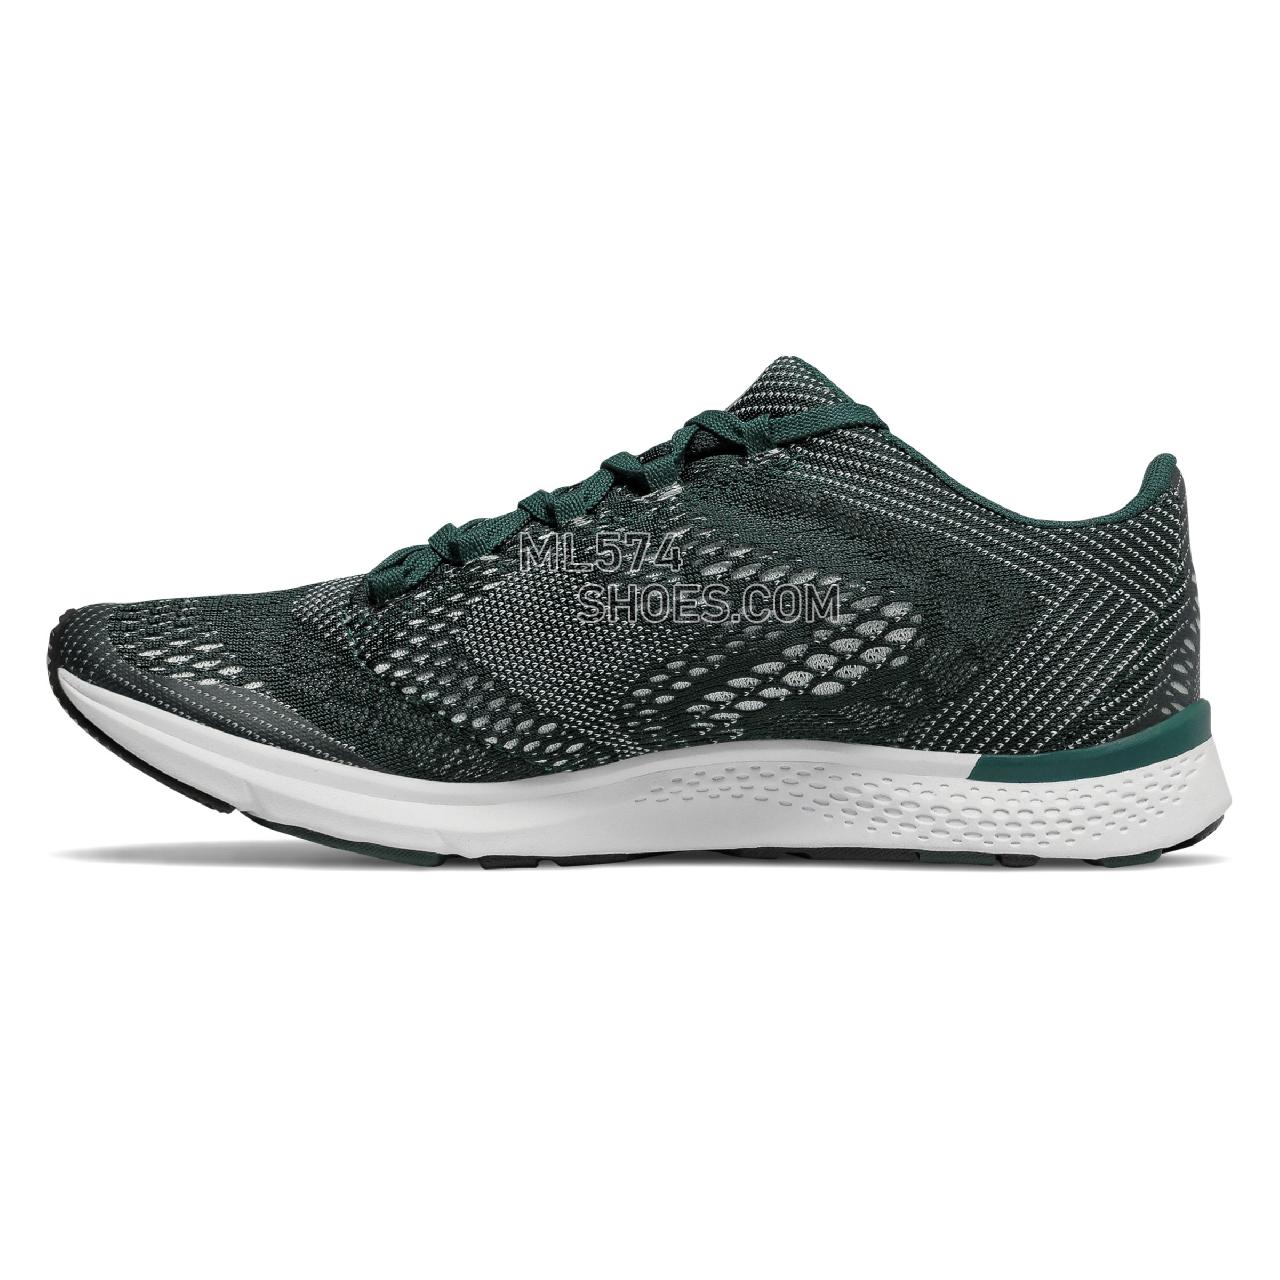 New Balance FuelCore Agility v2 Trainer - Women's 2 - X-training Deep Jade with Ocean Air - WXAGLGG2